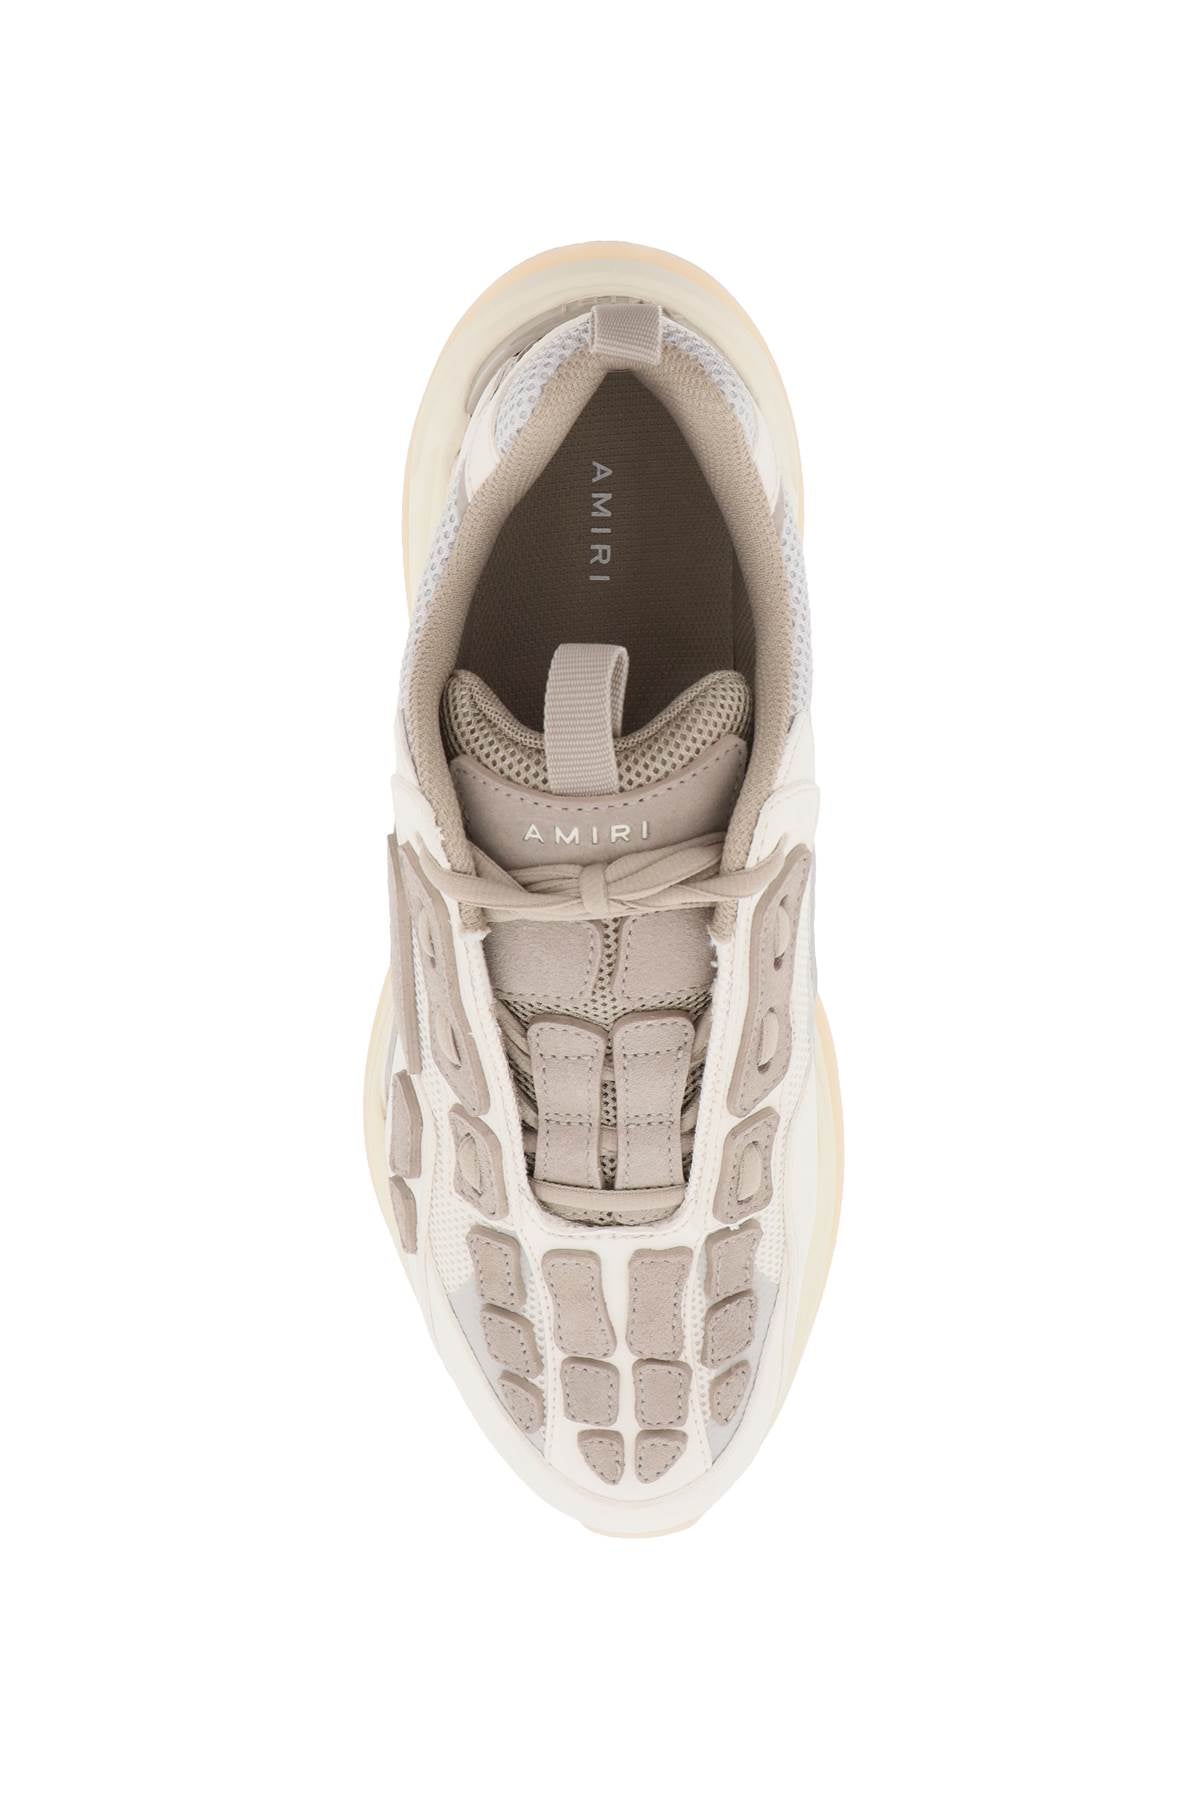 AMIRI White Chunky Sole Sneakers for Men with Contrasting Leather Inserts